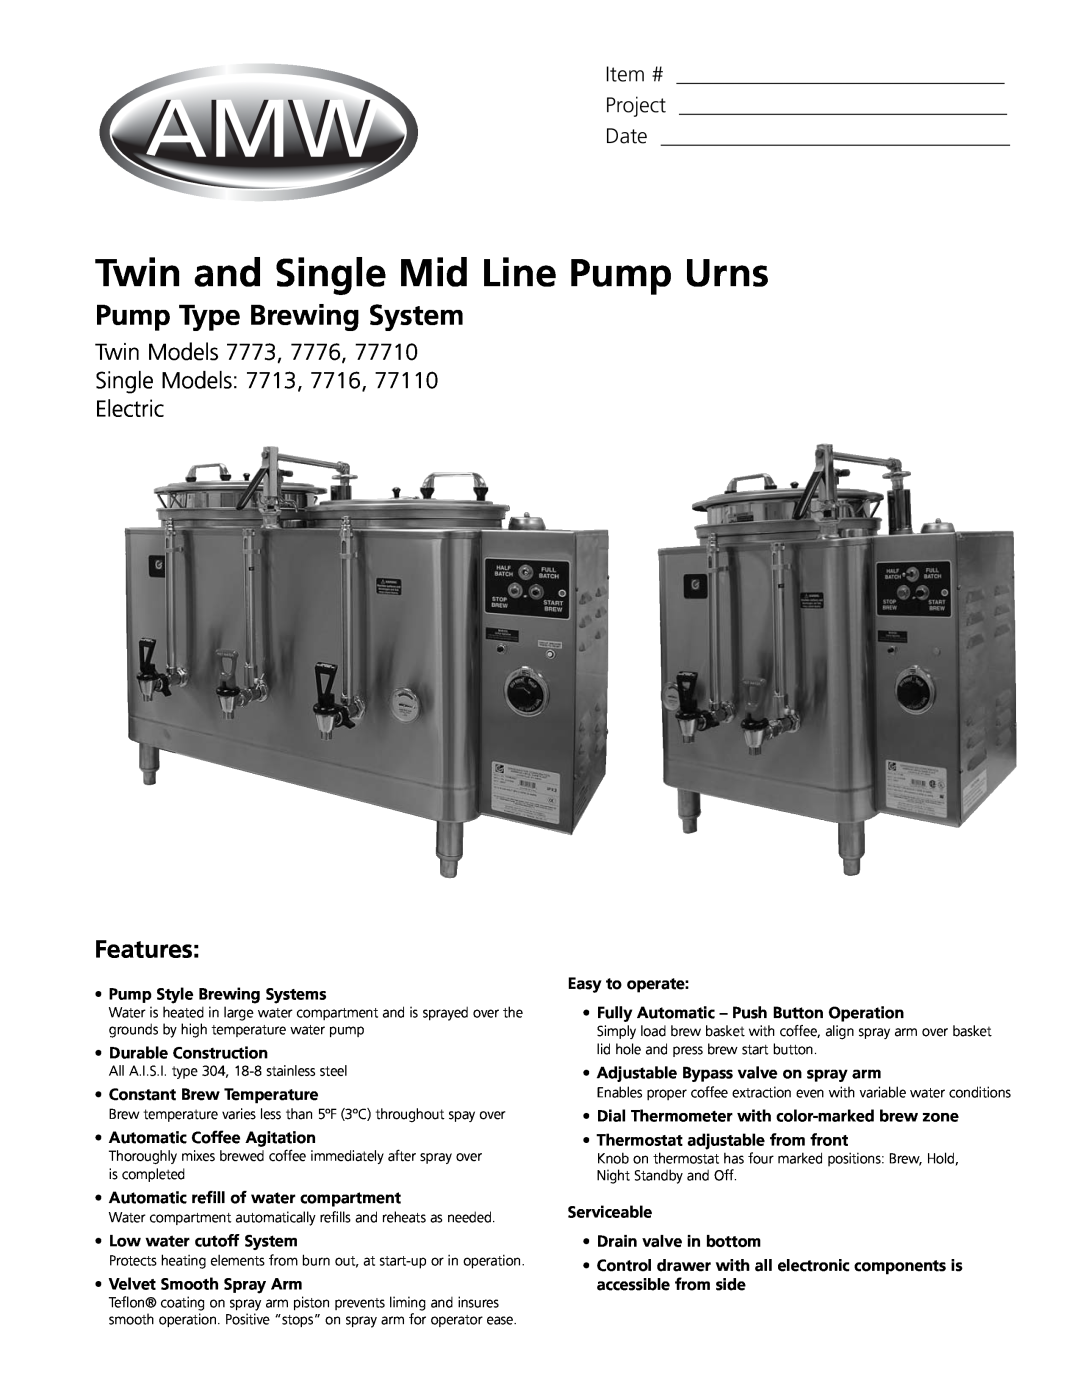 Grindmaster 7776 manual Twin and Single Mid Line Pump Urns, Pump Type Brewing System, Features, Twin Models, Item #, Date 